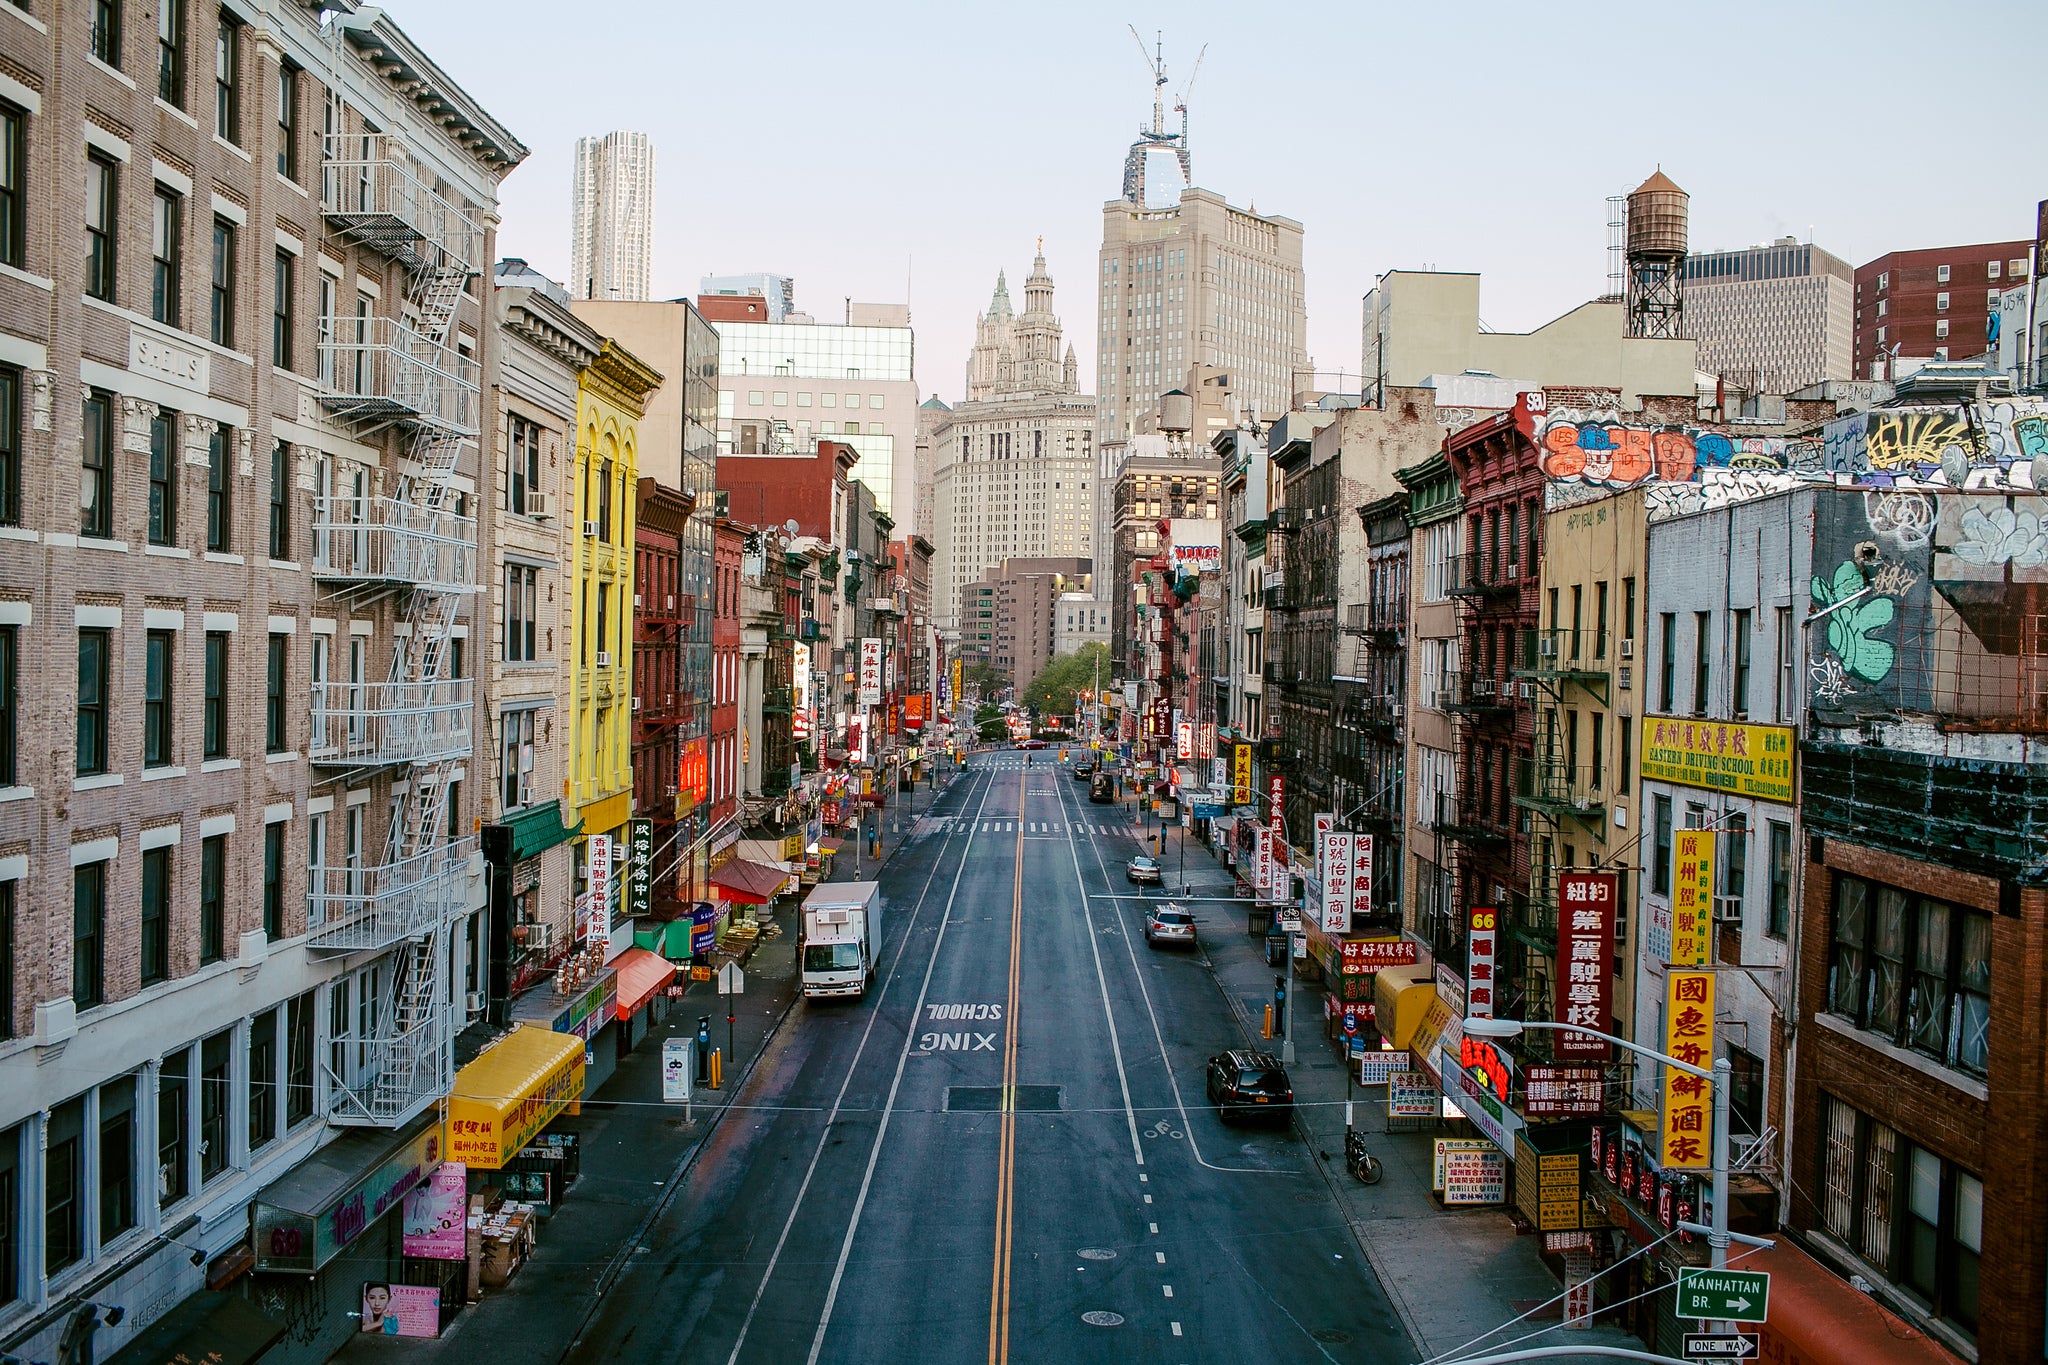 The empty streets of Chinatown, Manhattan.